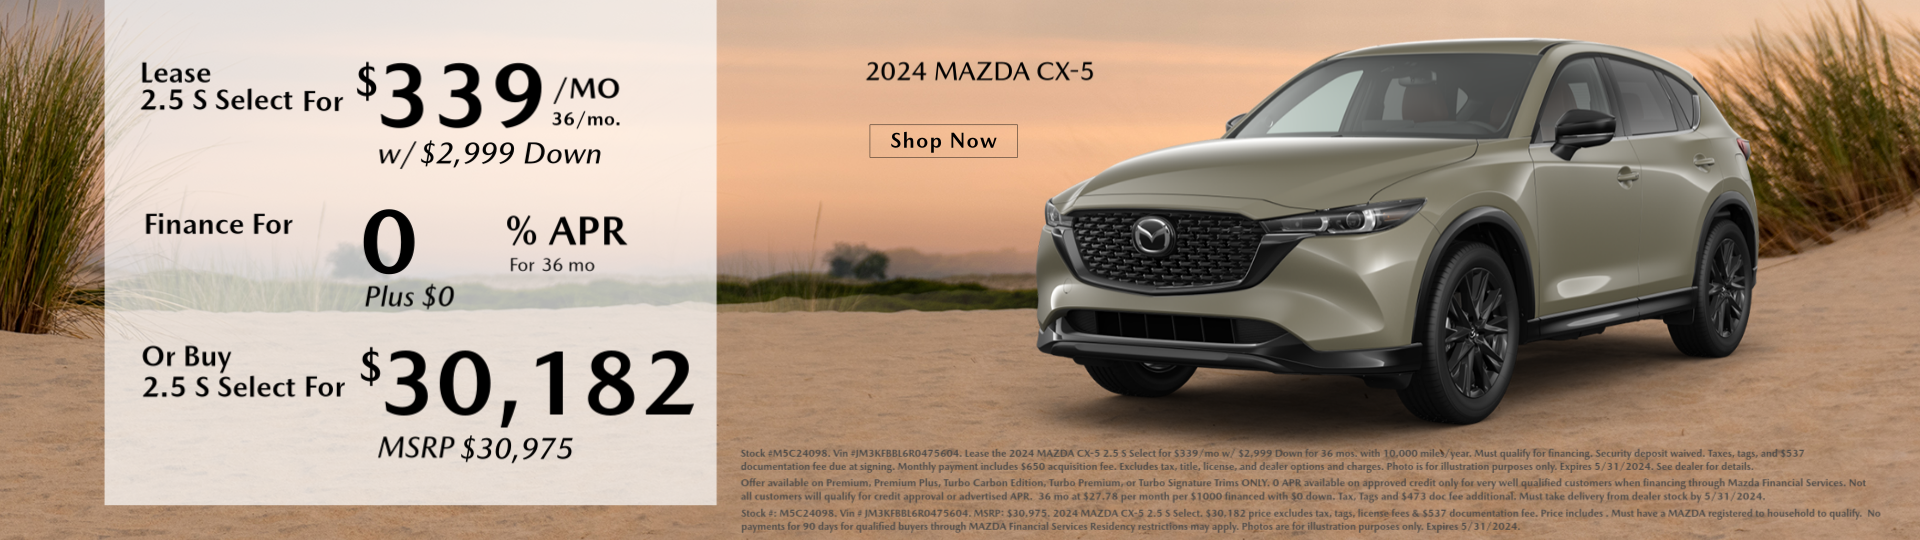 Don't miss our New MAZDA CX-5 Offers at Chapman Mazda New Jersey!